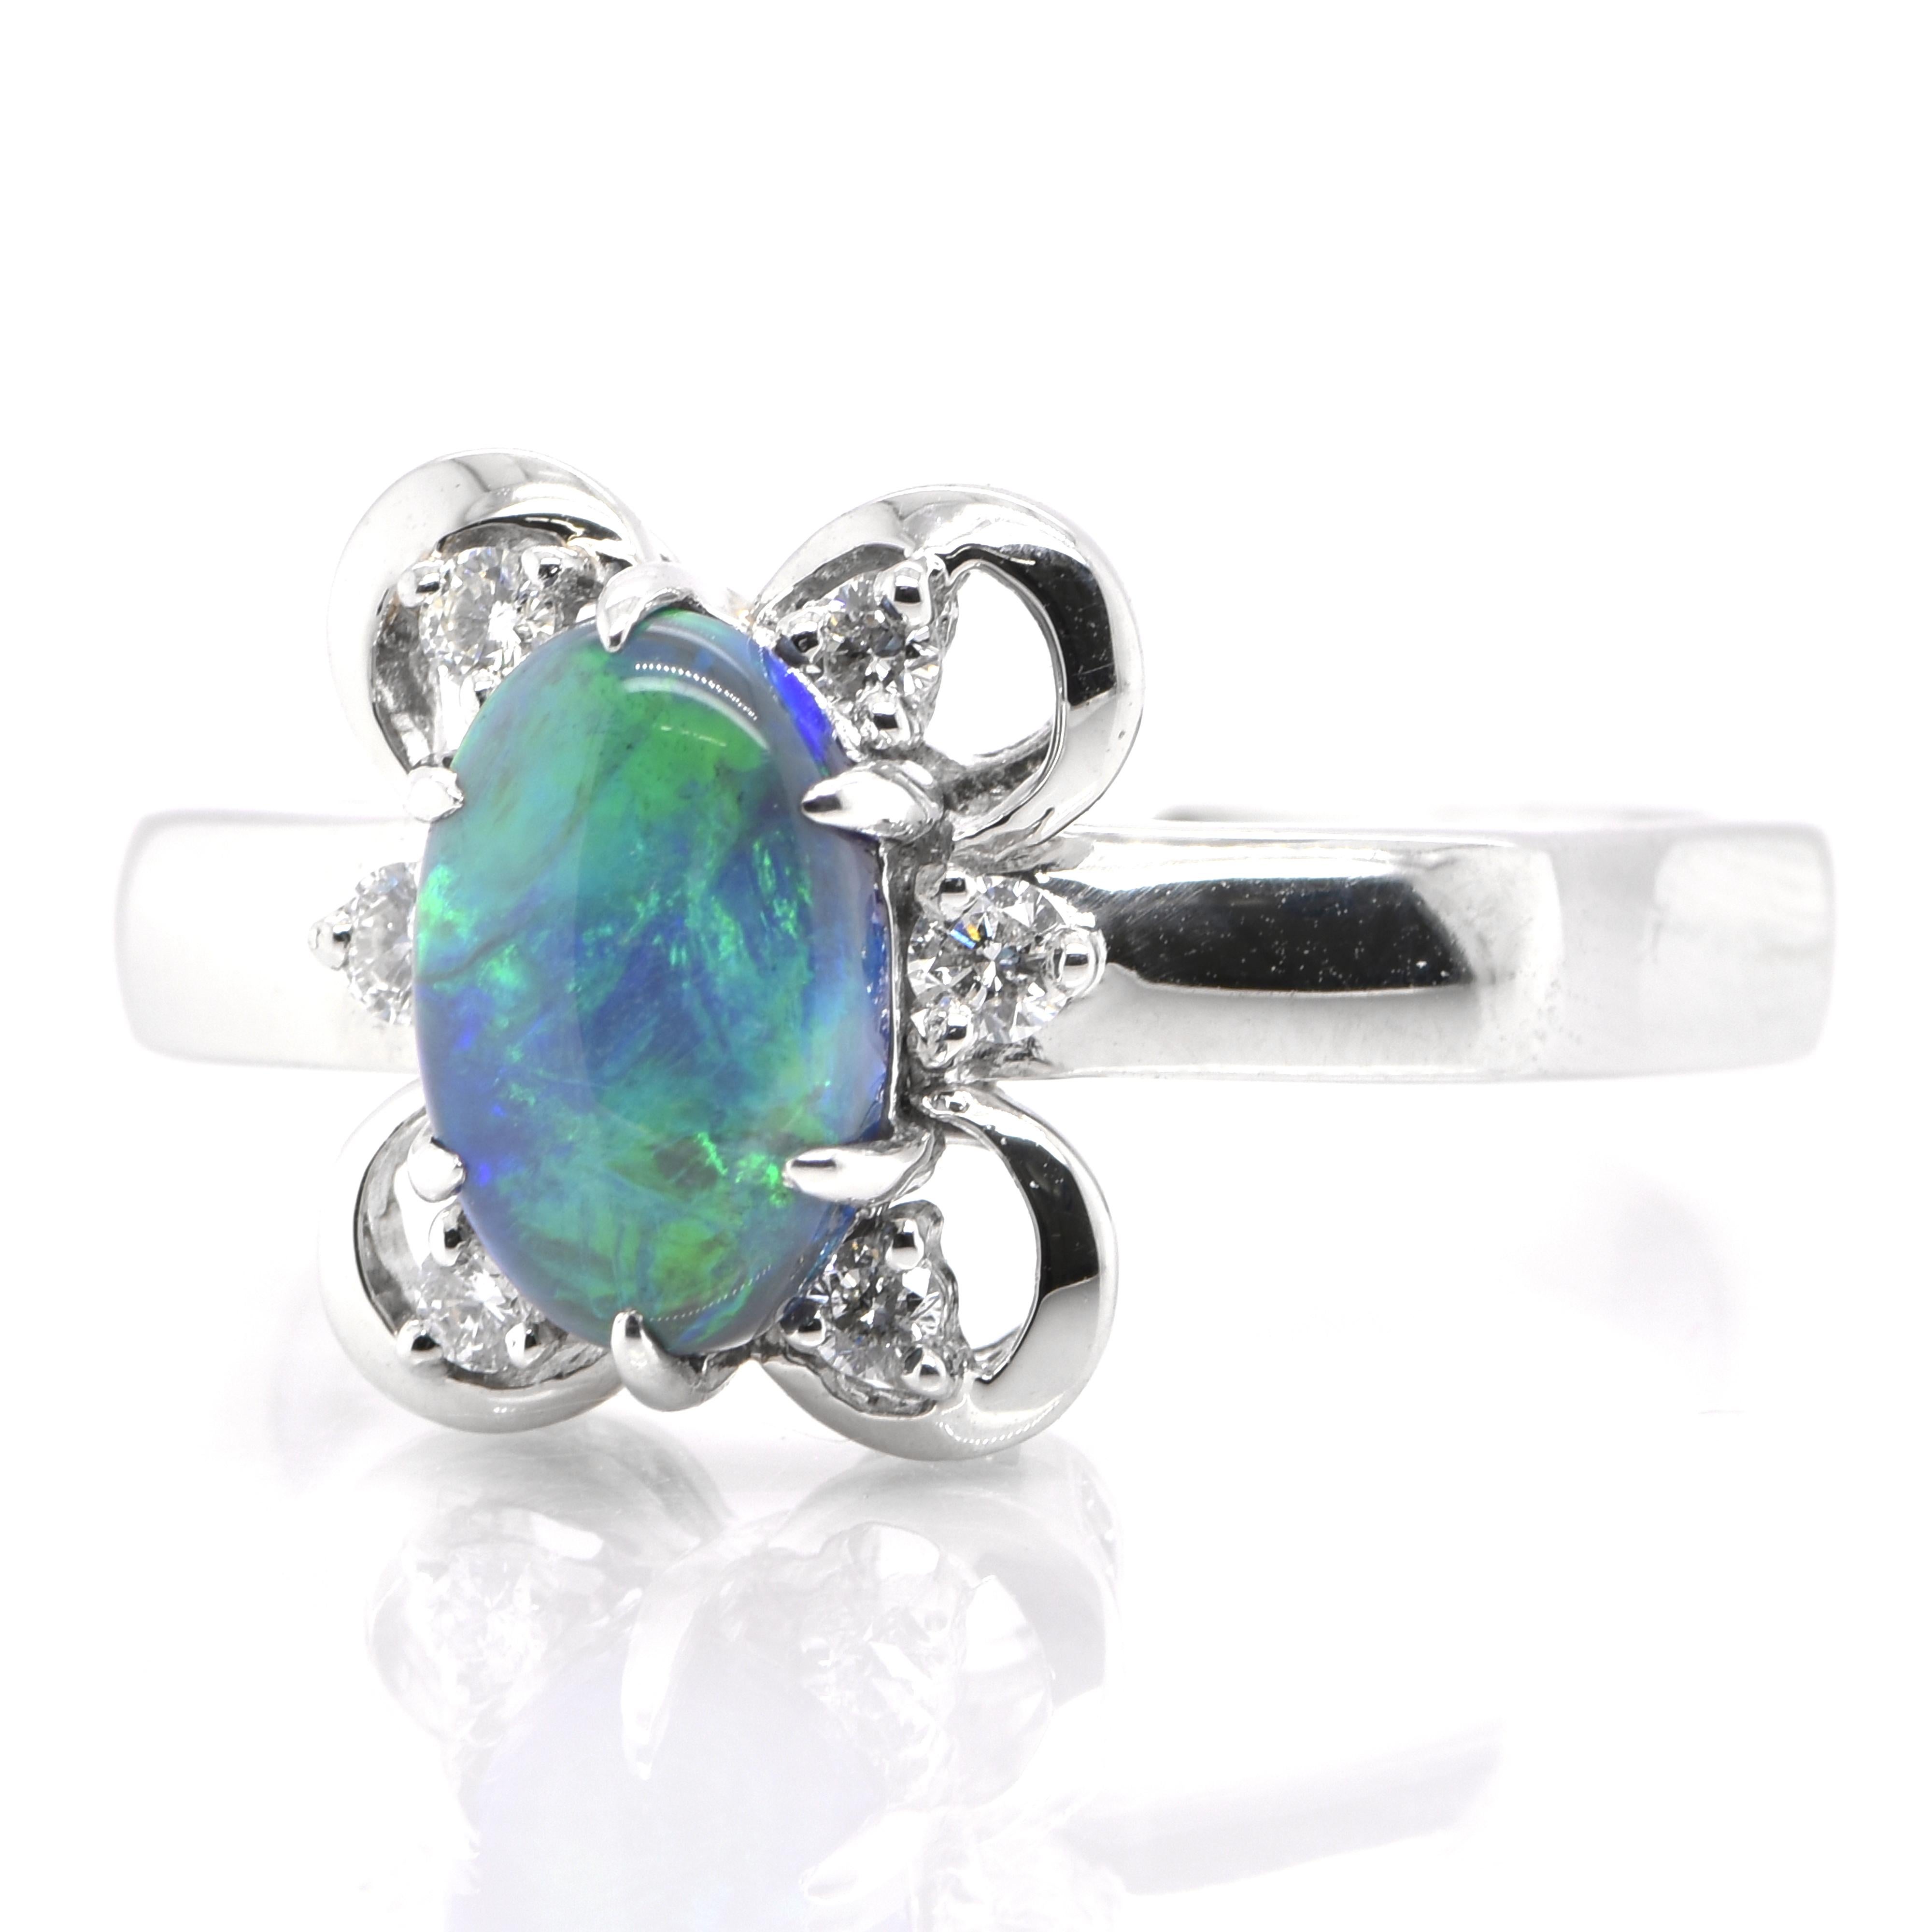 A beautiful Cocktail Ring featuring a 1.43 Carat, Natural, Australian Black Opal and 0.20 Carats of Diamond Accents set in Platinum. The Opal displays very good play of color! Opals are known for exhibiting flashes of rainbow colors known as 